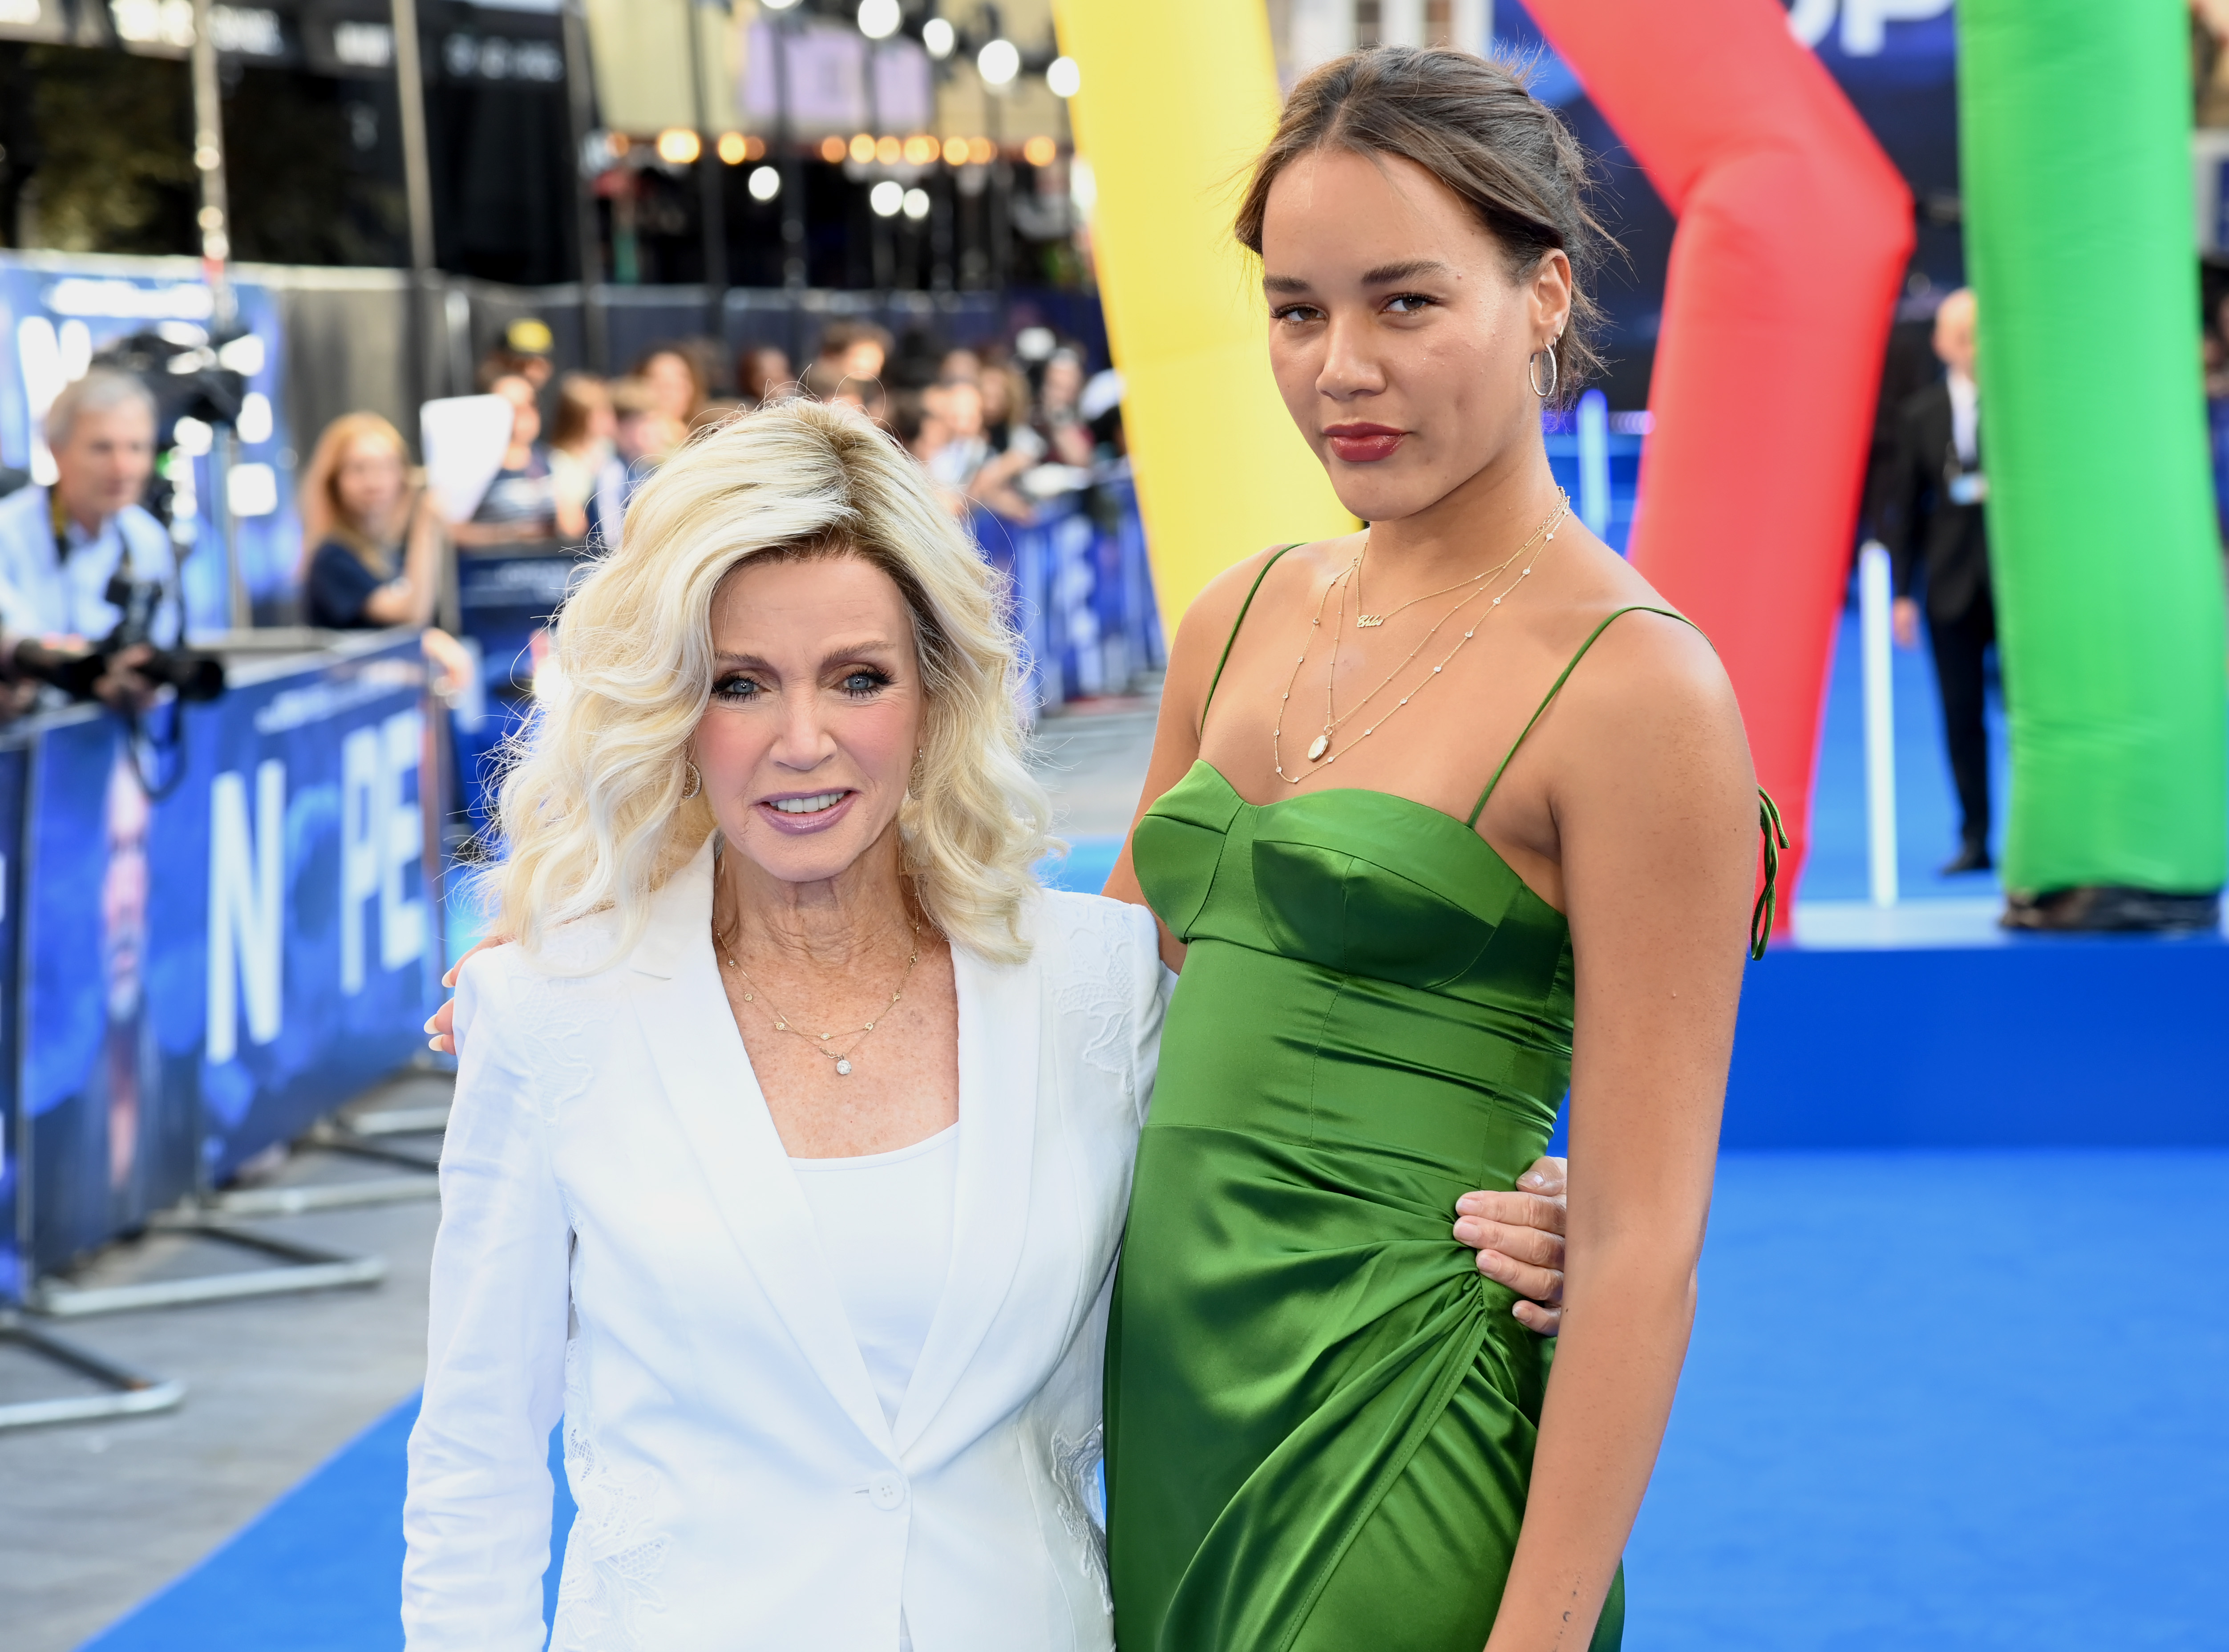 Donna Mills and daughter Chloe attend the UK premiere of "NOPE" at Odeon Luxe Leicester Square, on July 28, 2022, in London, England. | Source: Getty Images